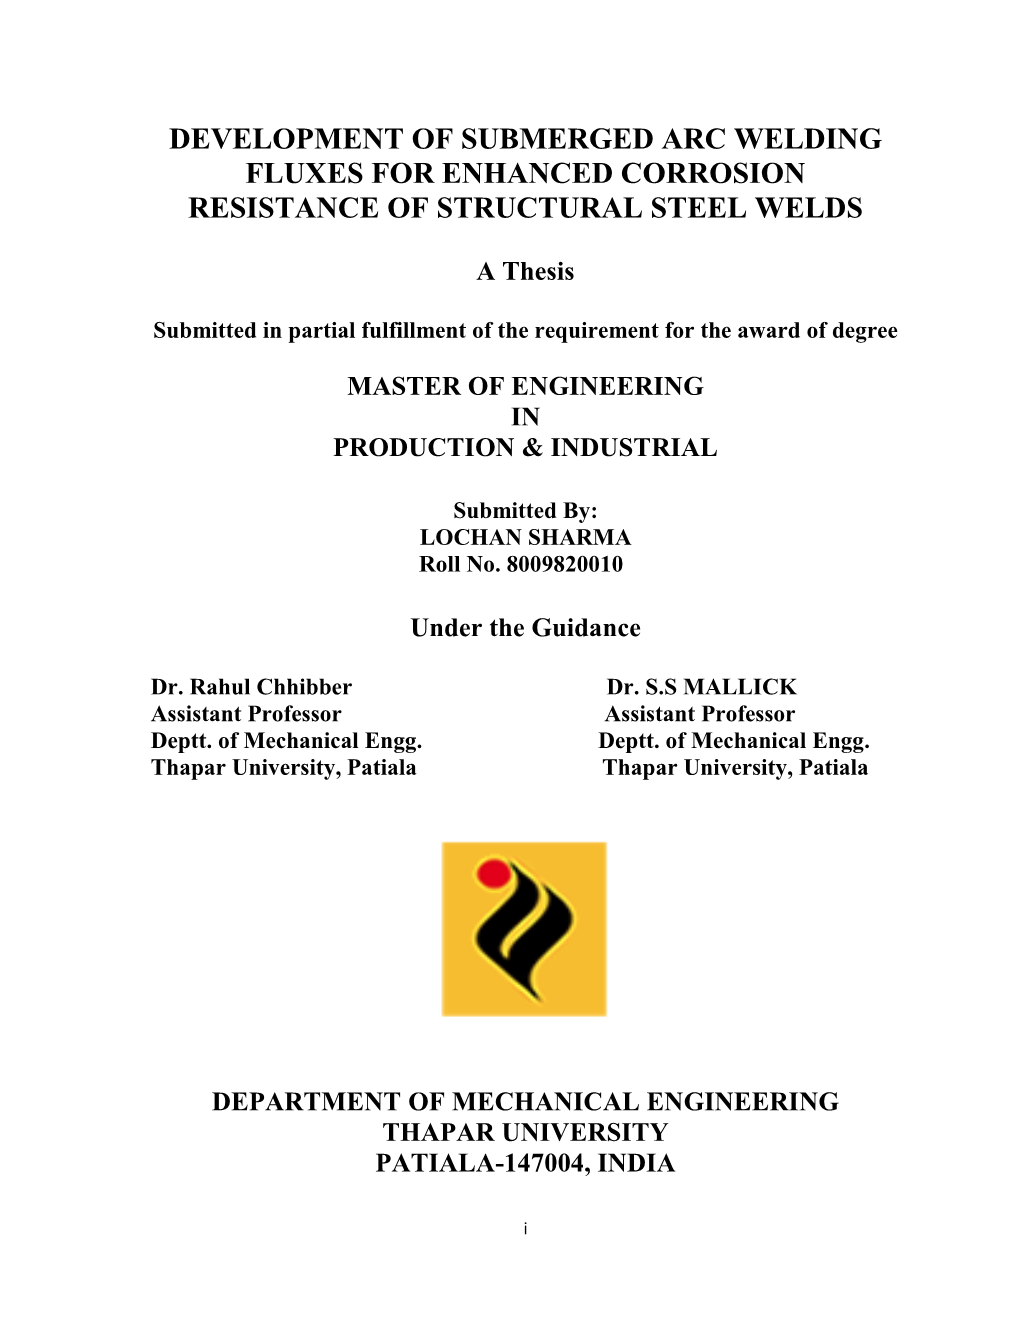 Development of Submerged Arc Welding Fluxes for Enhanced Corrosion Resistance of Structural Steel Welds